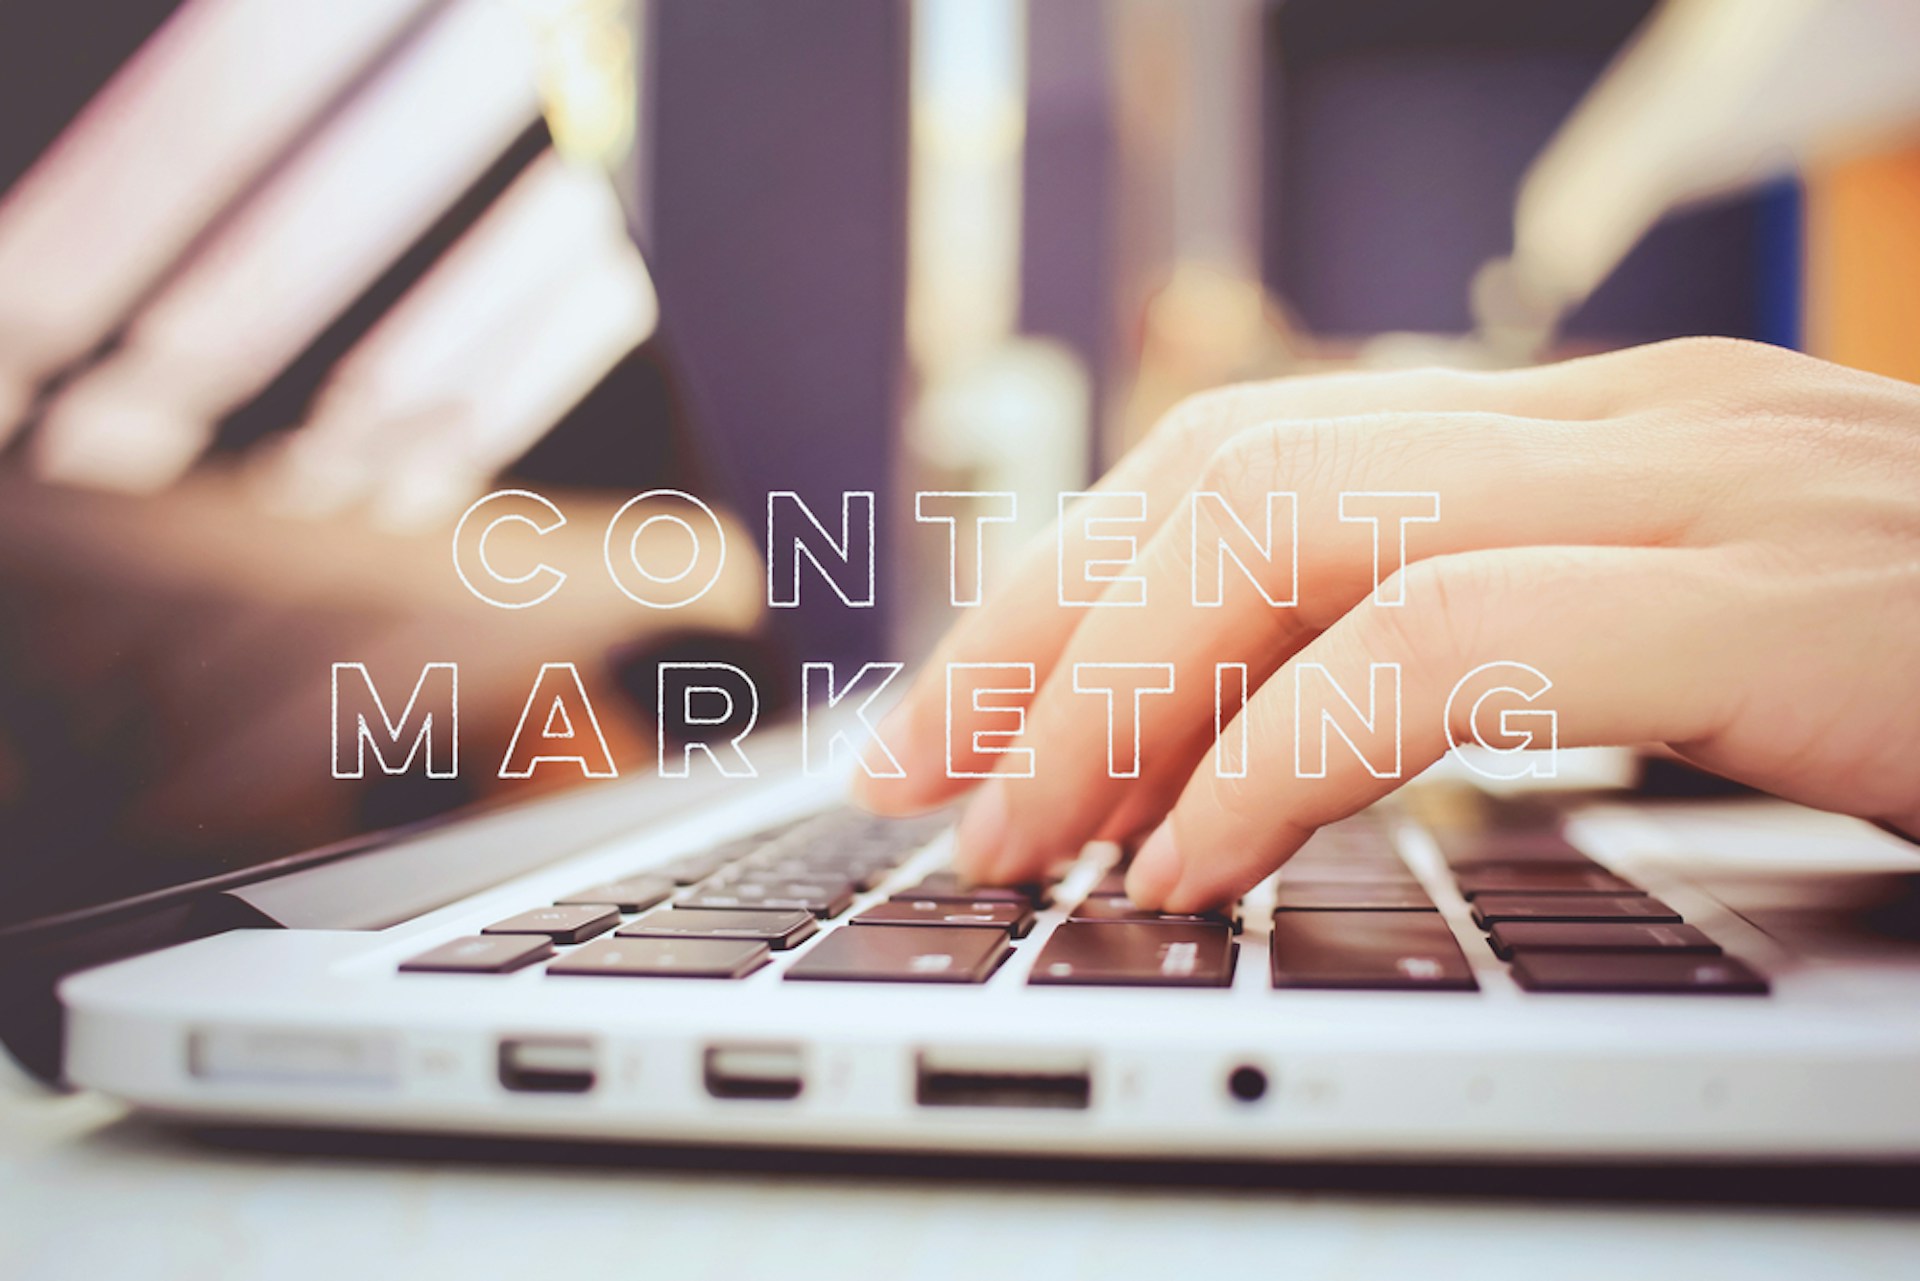 The title text "Content Marketing" overlaid over an image of a hand on a laptop keyboard